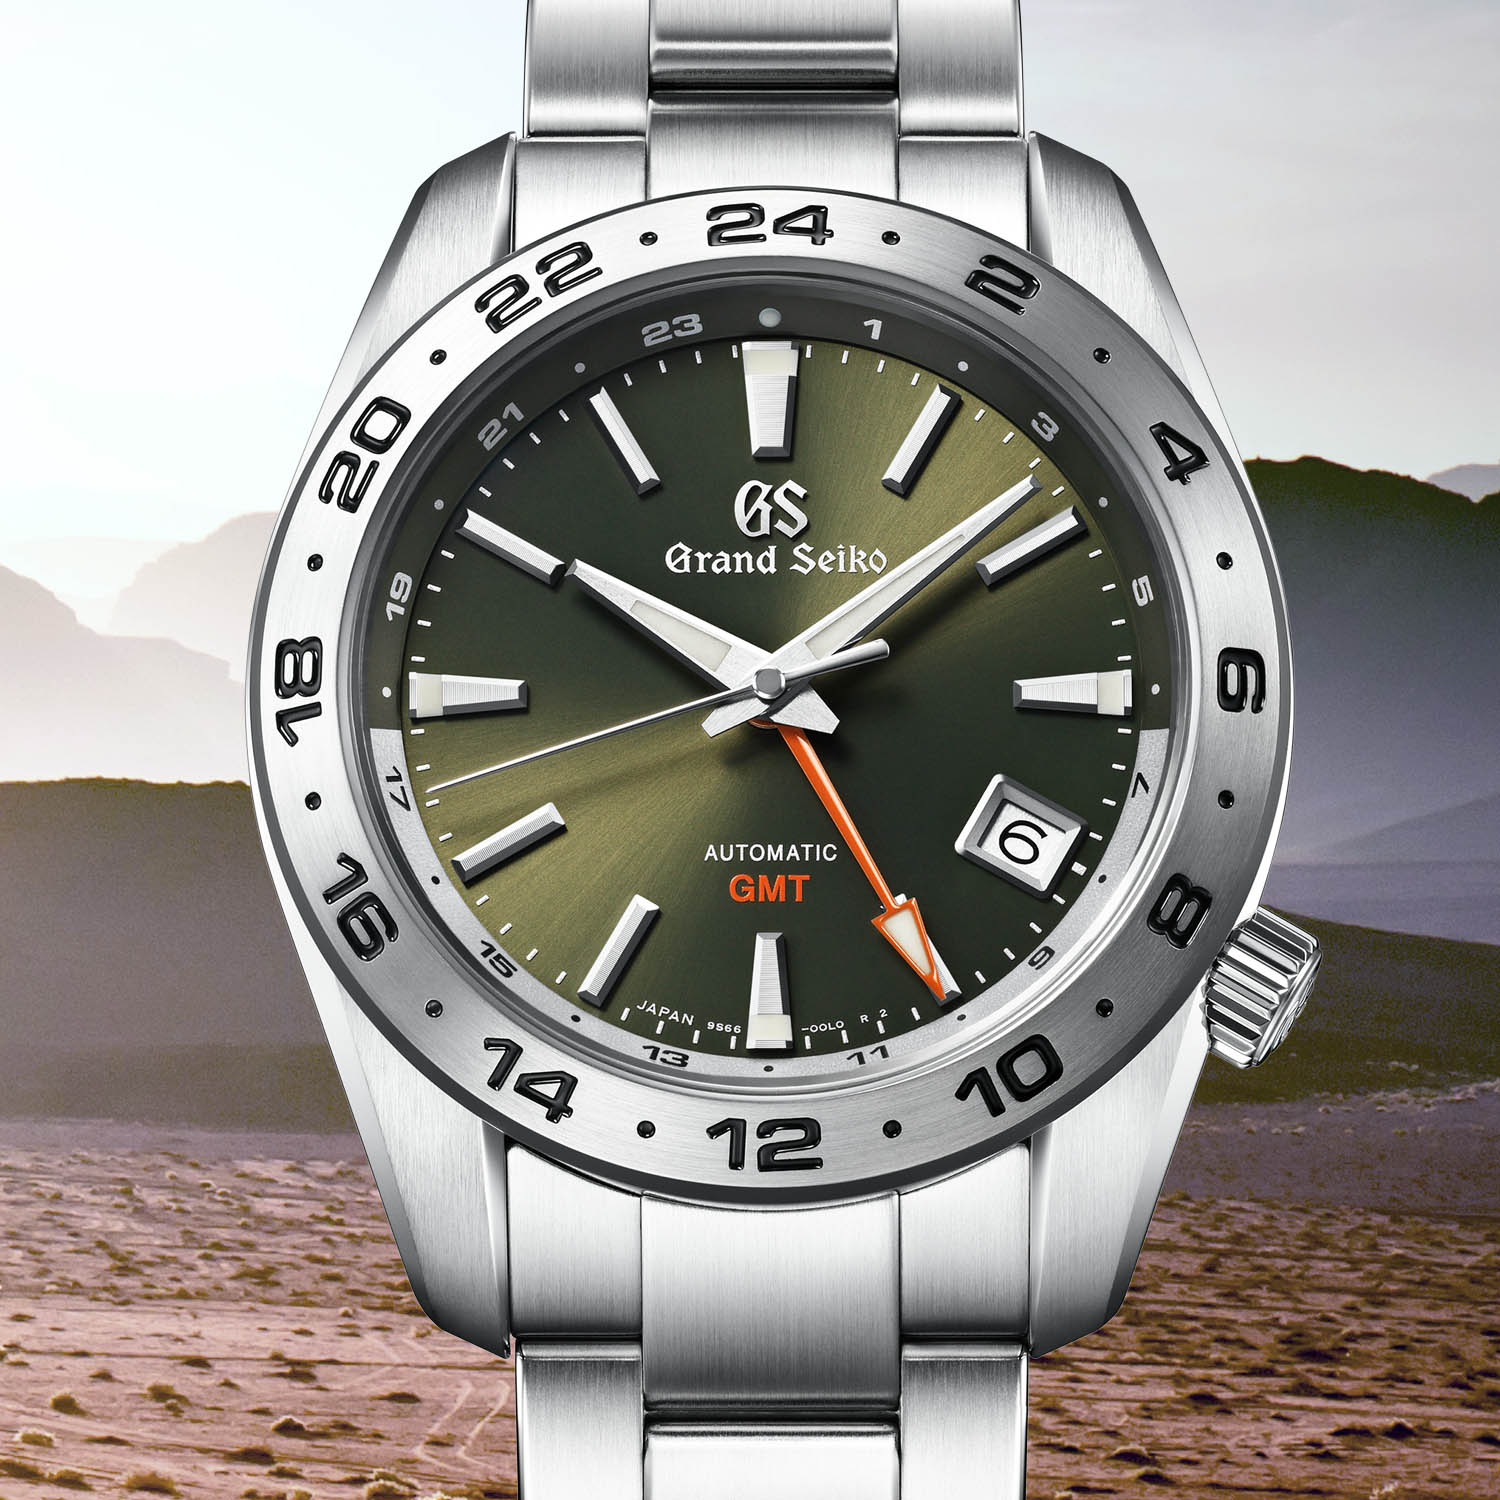 Introducing The Grand Seiko Sport Collection GMT SBGM245 & SBGM247 Watches